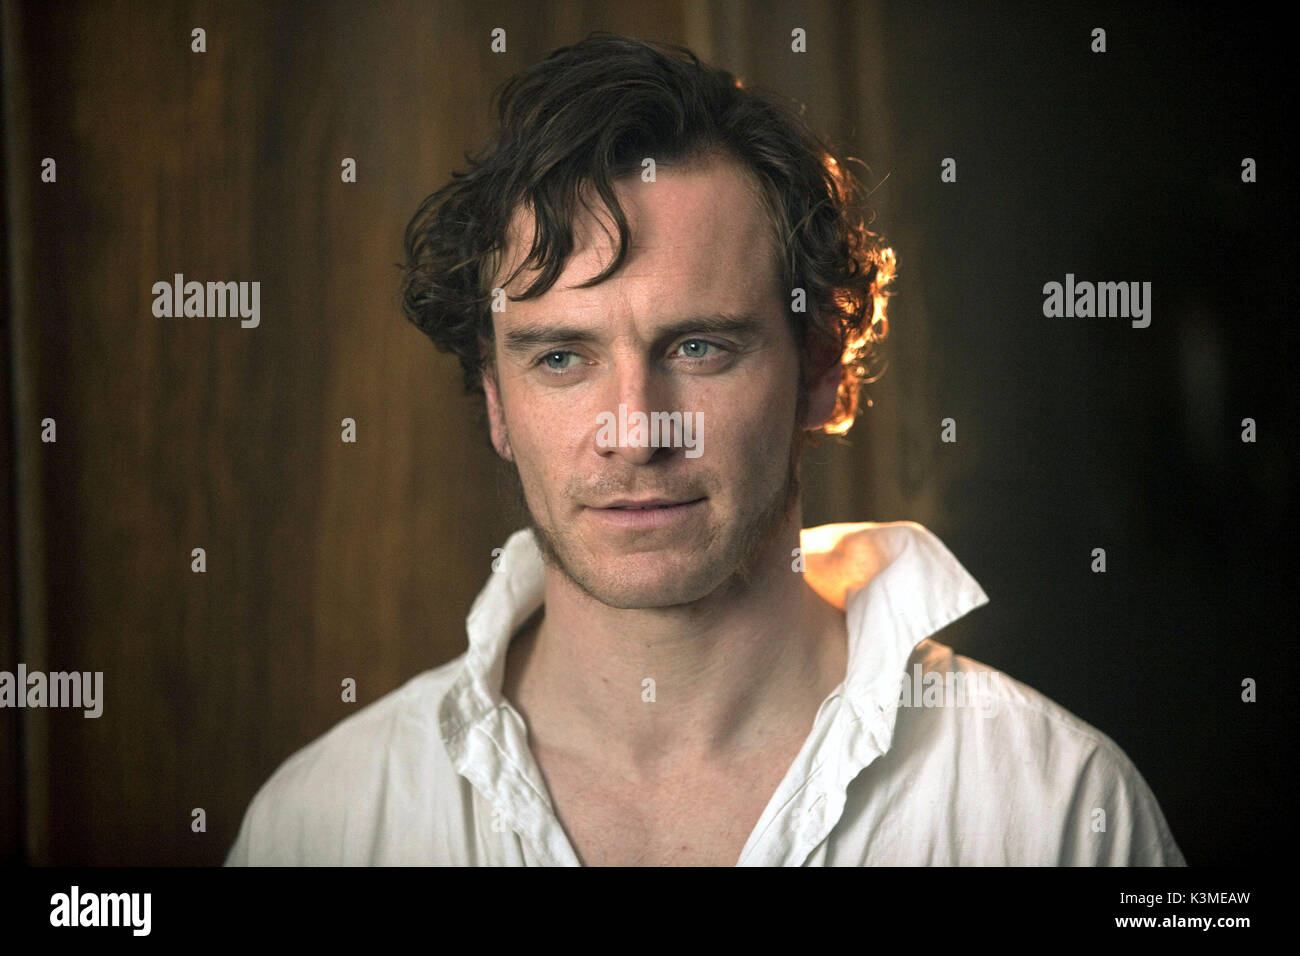 JANE EYRE [BR / US 2011] MICHAEL FASSBENDER as Mr Rochester     Date: 2011 Stock Photo